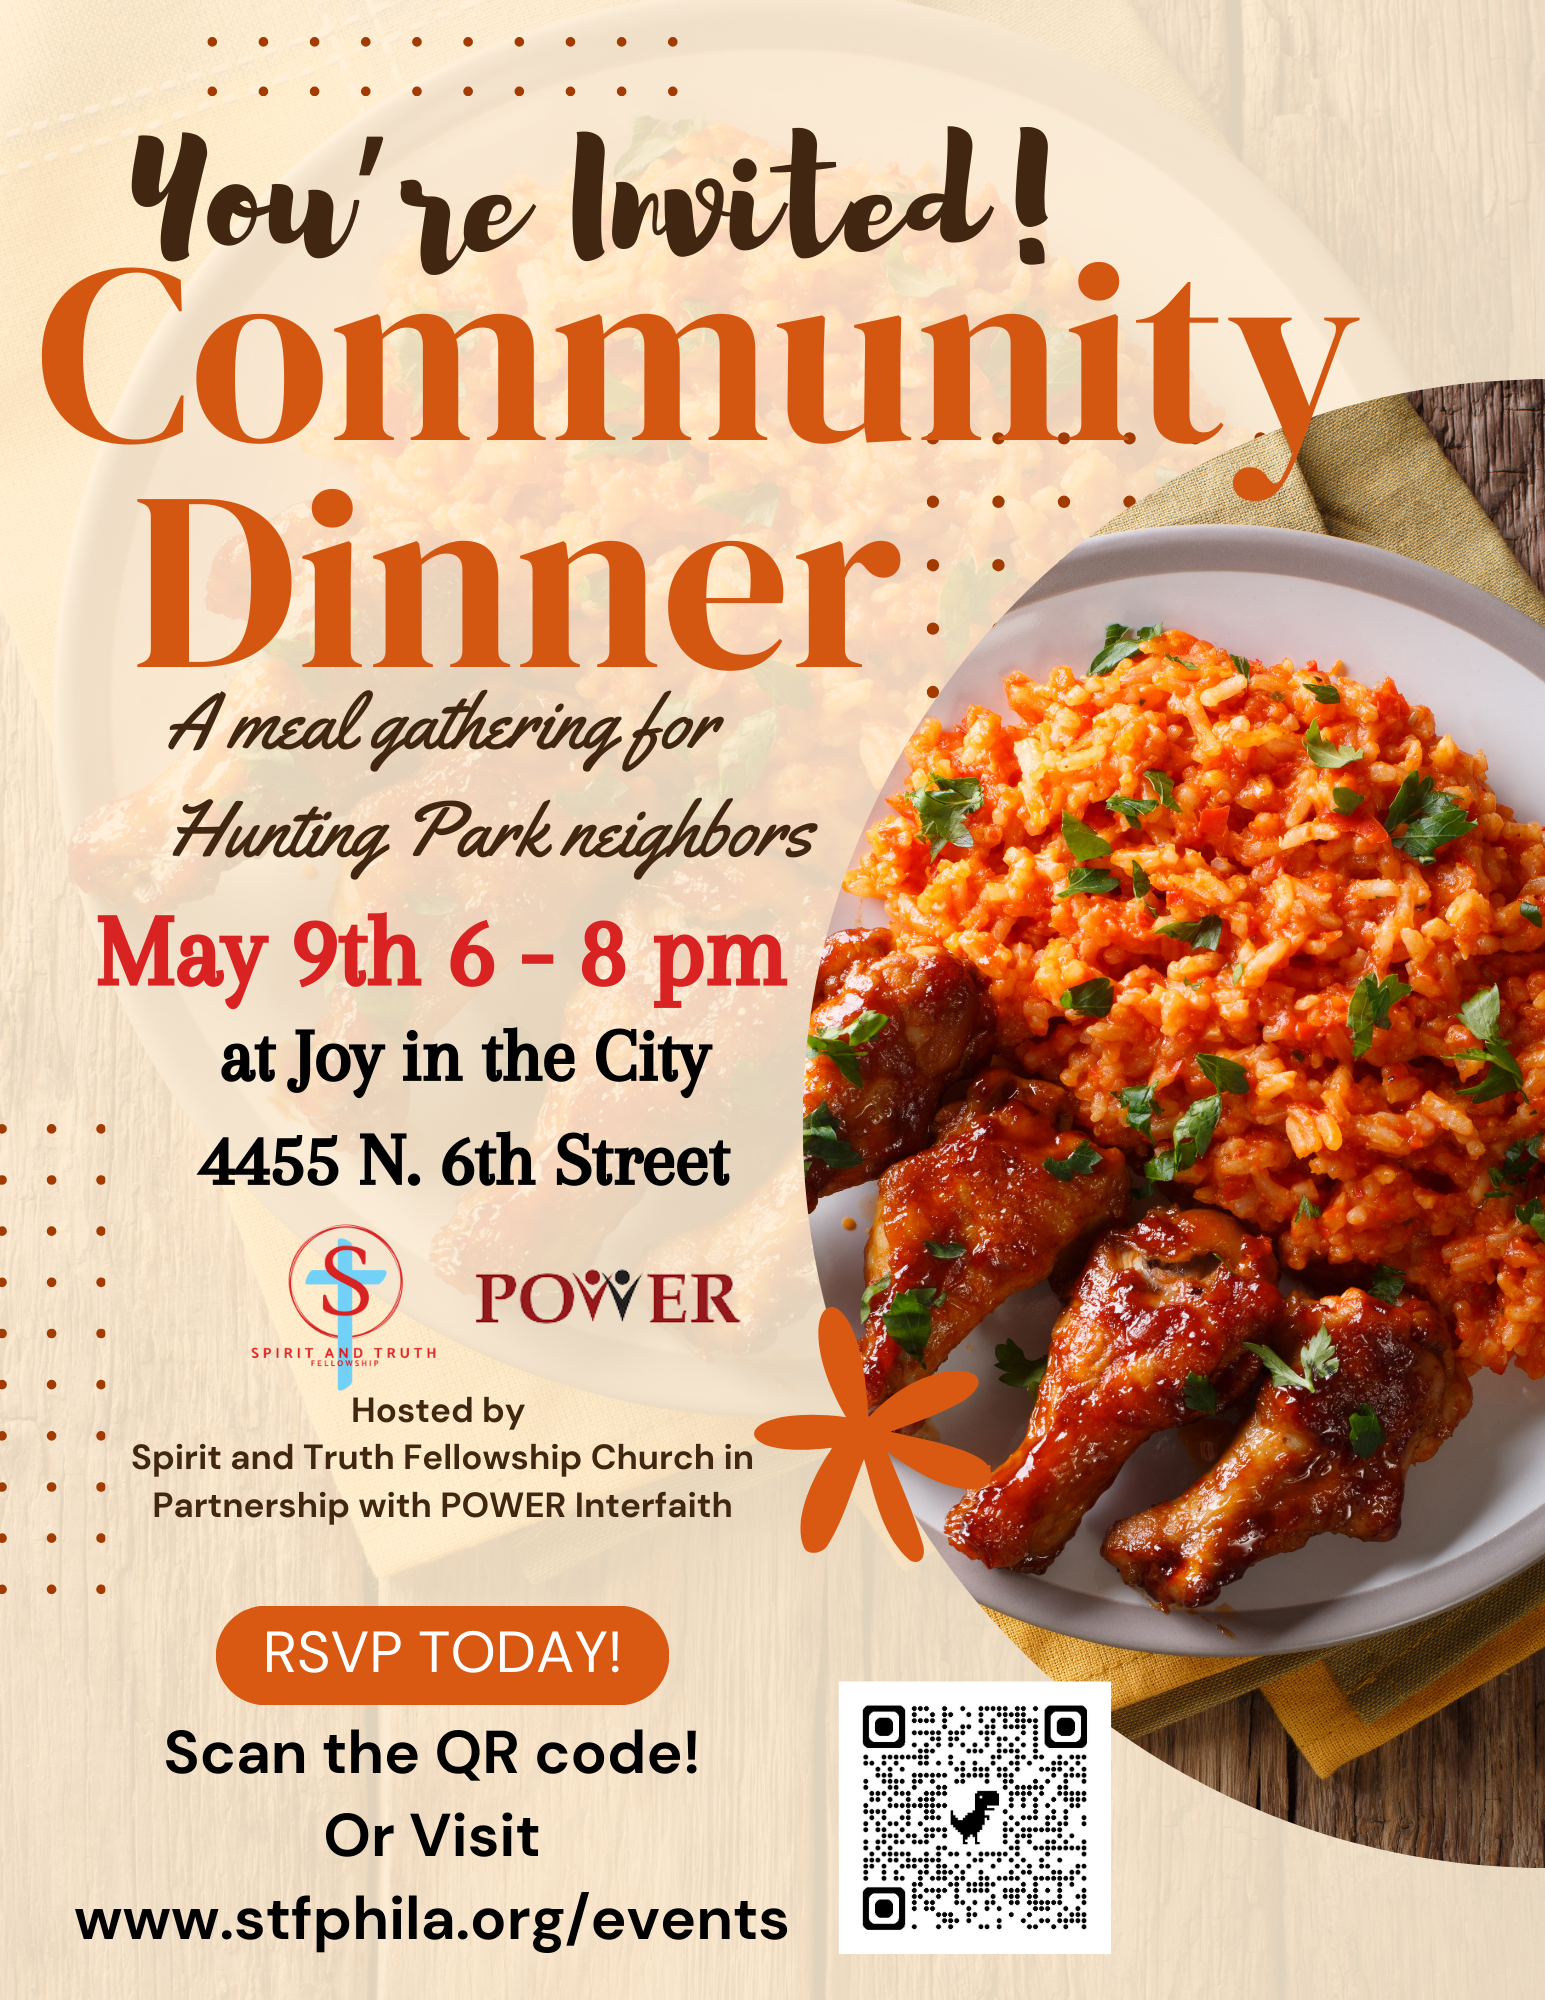 Community Dinner Hosted by POWER Interfaith and Spirit and Truth Fellowship Church